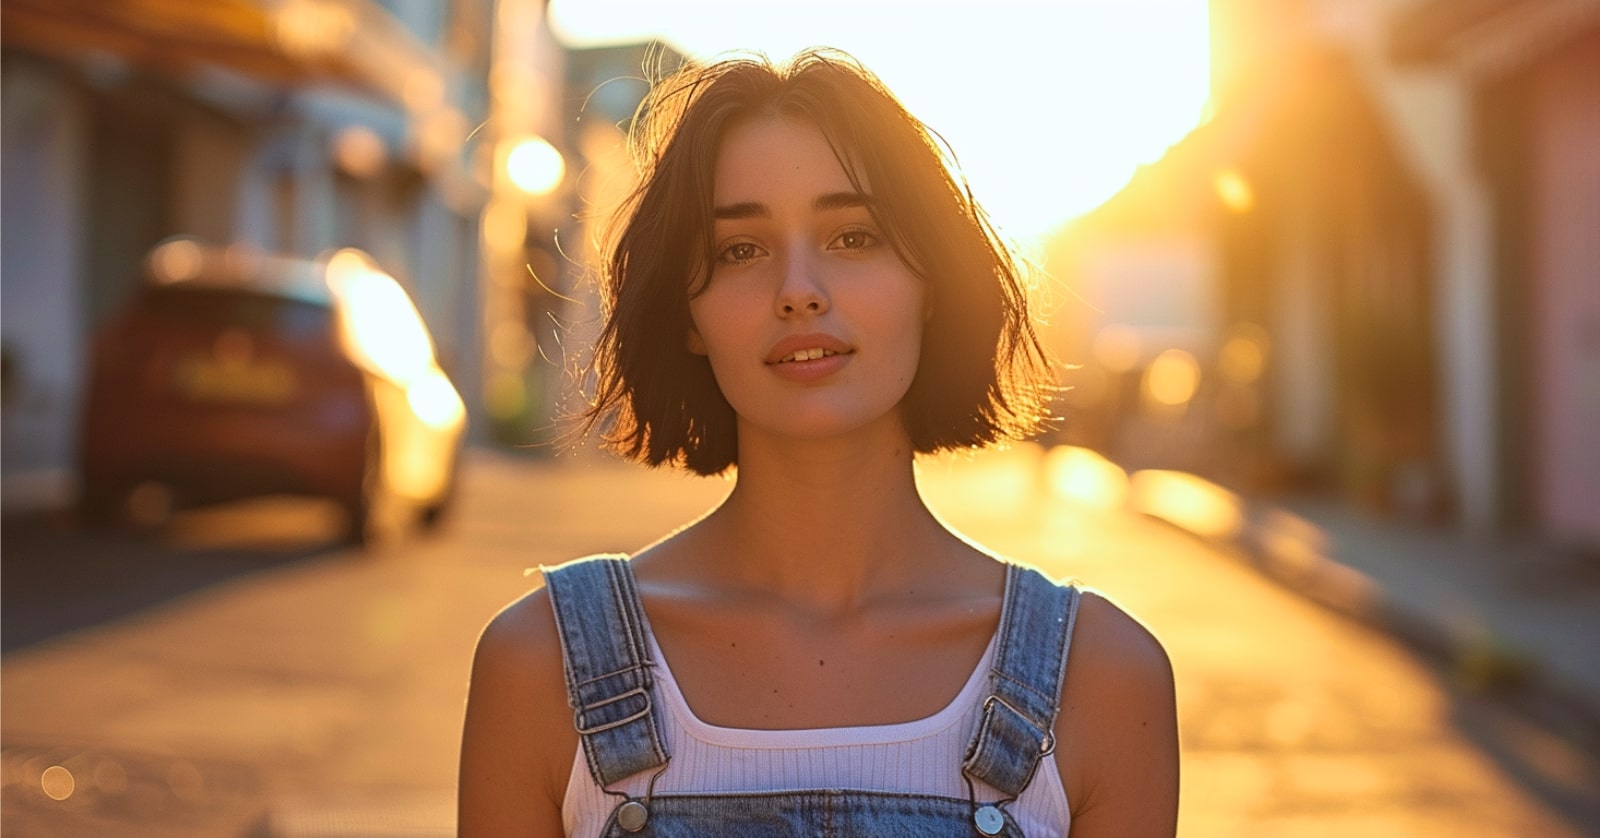 a young woman with a short black bob wearing denim dungarees and a white top. she is walking down a quiet street at the golden hour